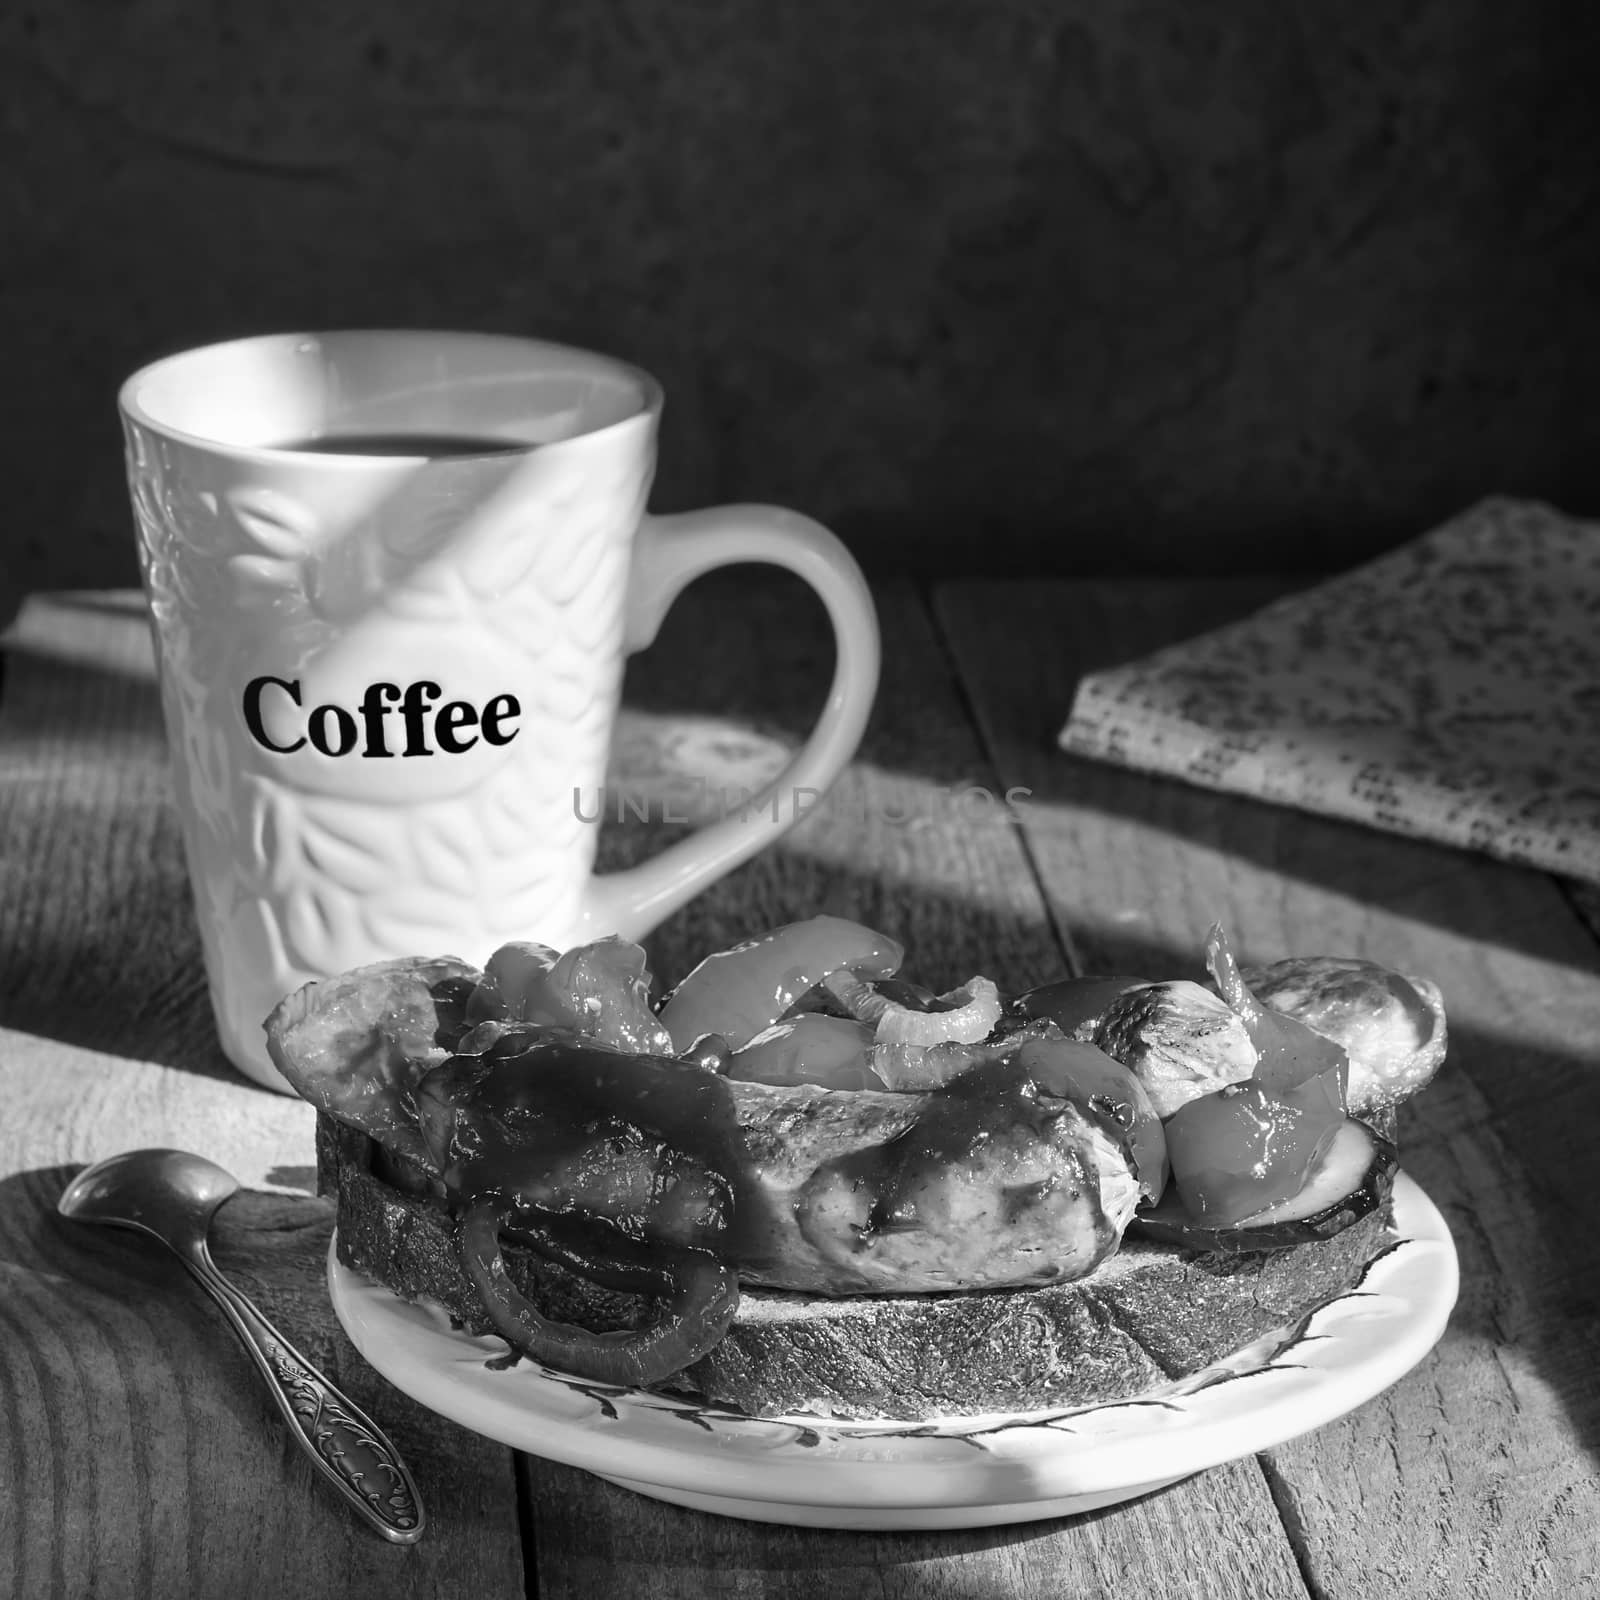 Sandwich with grilled sausages on a plate and coffee mug by Gaina